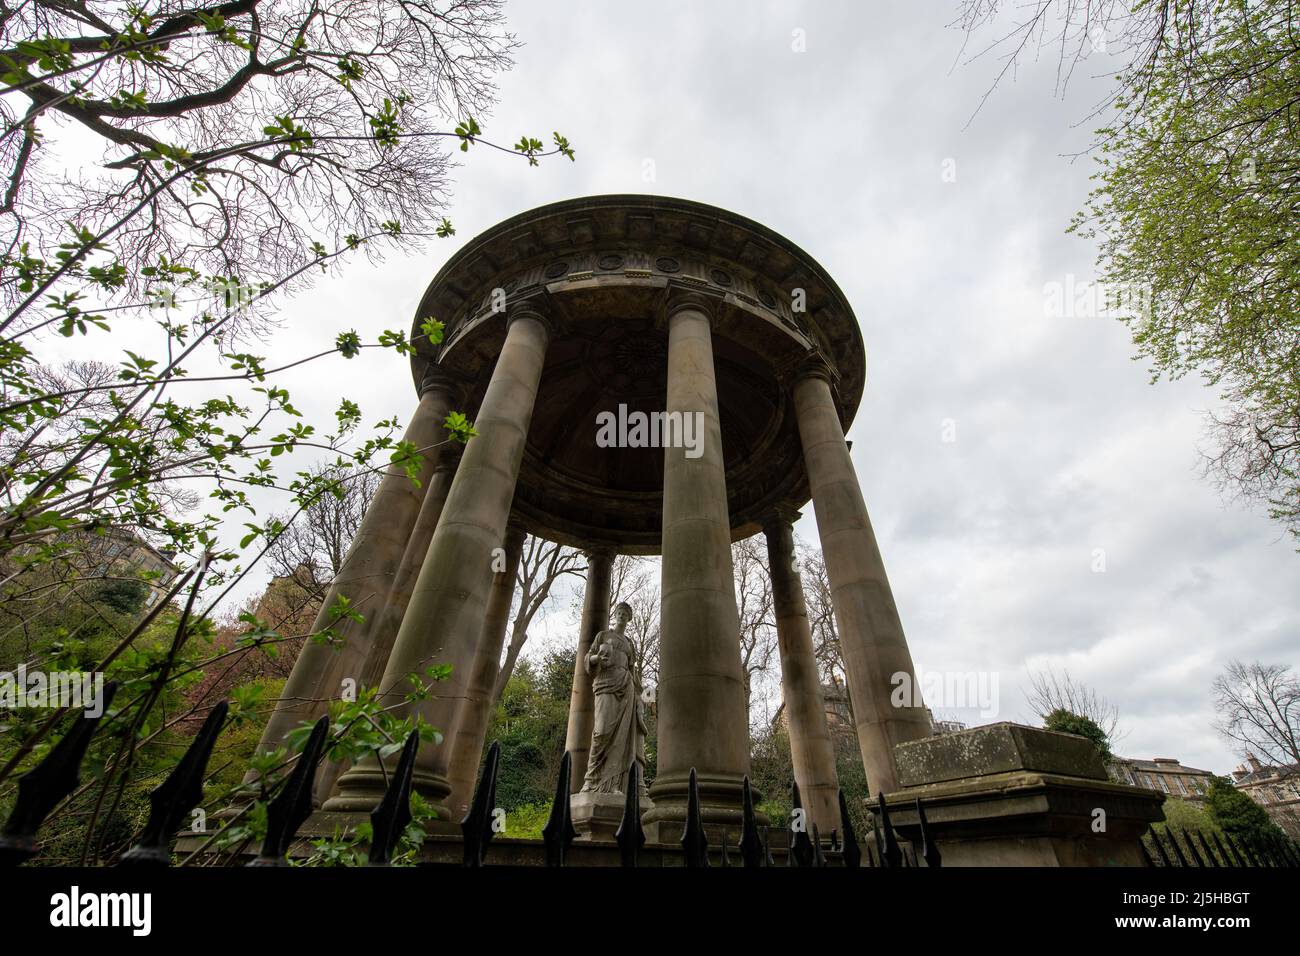 St Bernard's Well A beautiful Greco-Roman structure houses a well once believed to have healing powers. Edinburgh, Scotland Stock Photo